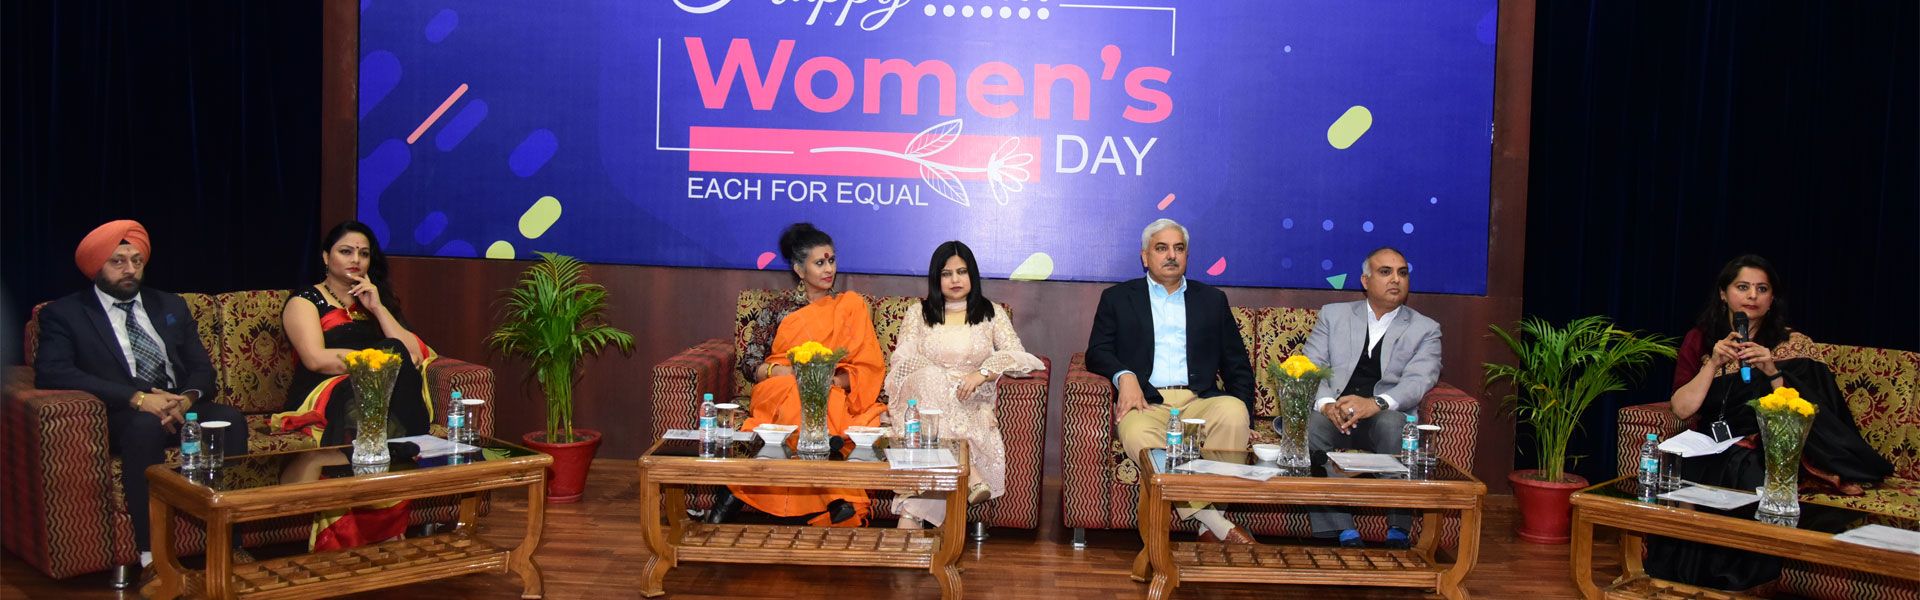 Women’s Day Celebration at Chandigarh Group of Colleges Landran 